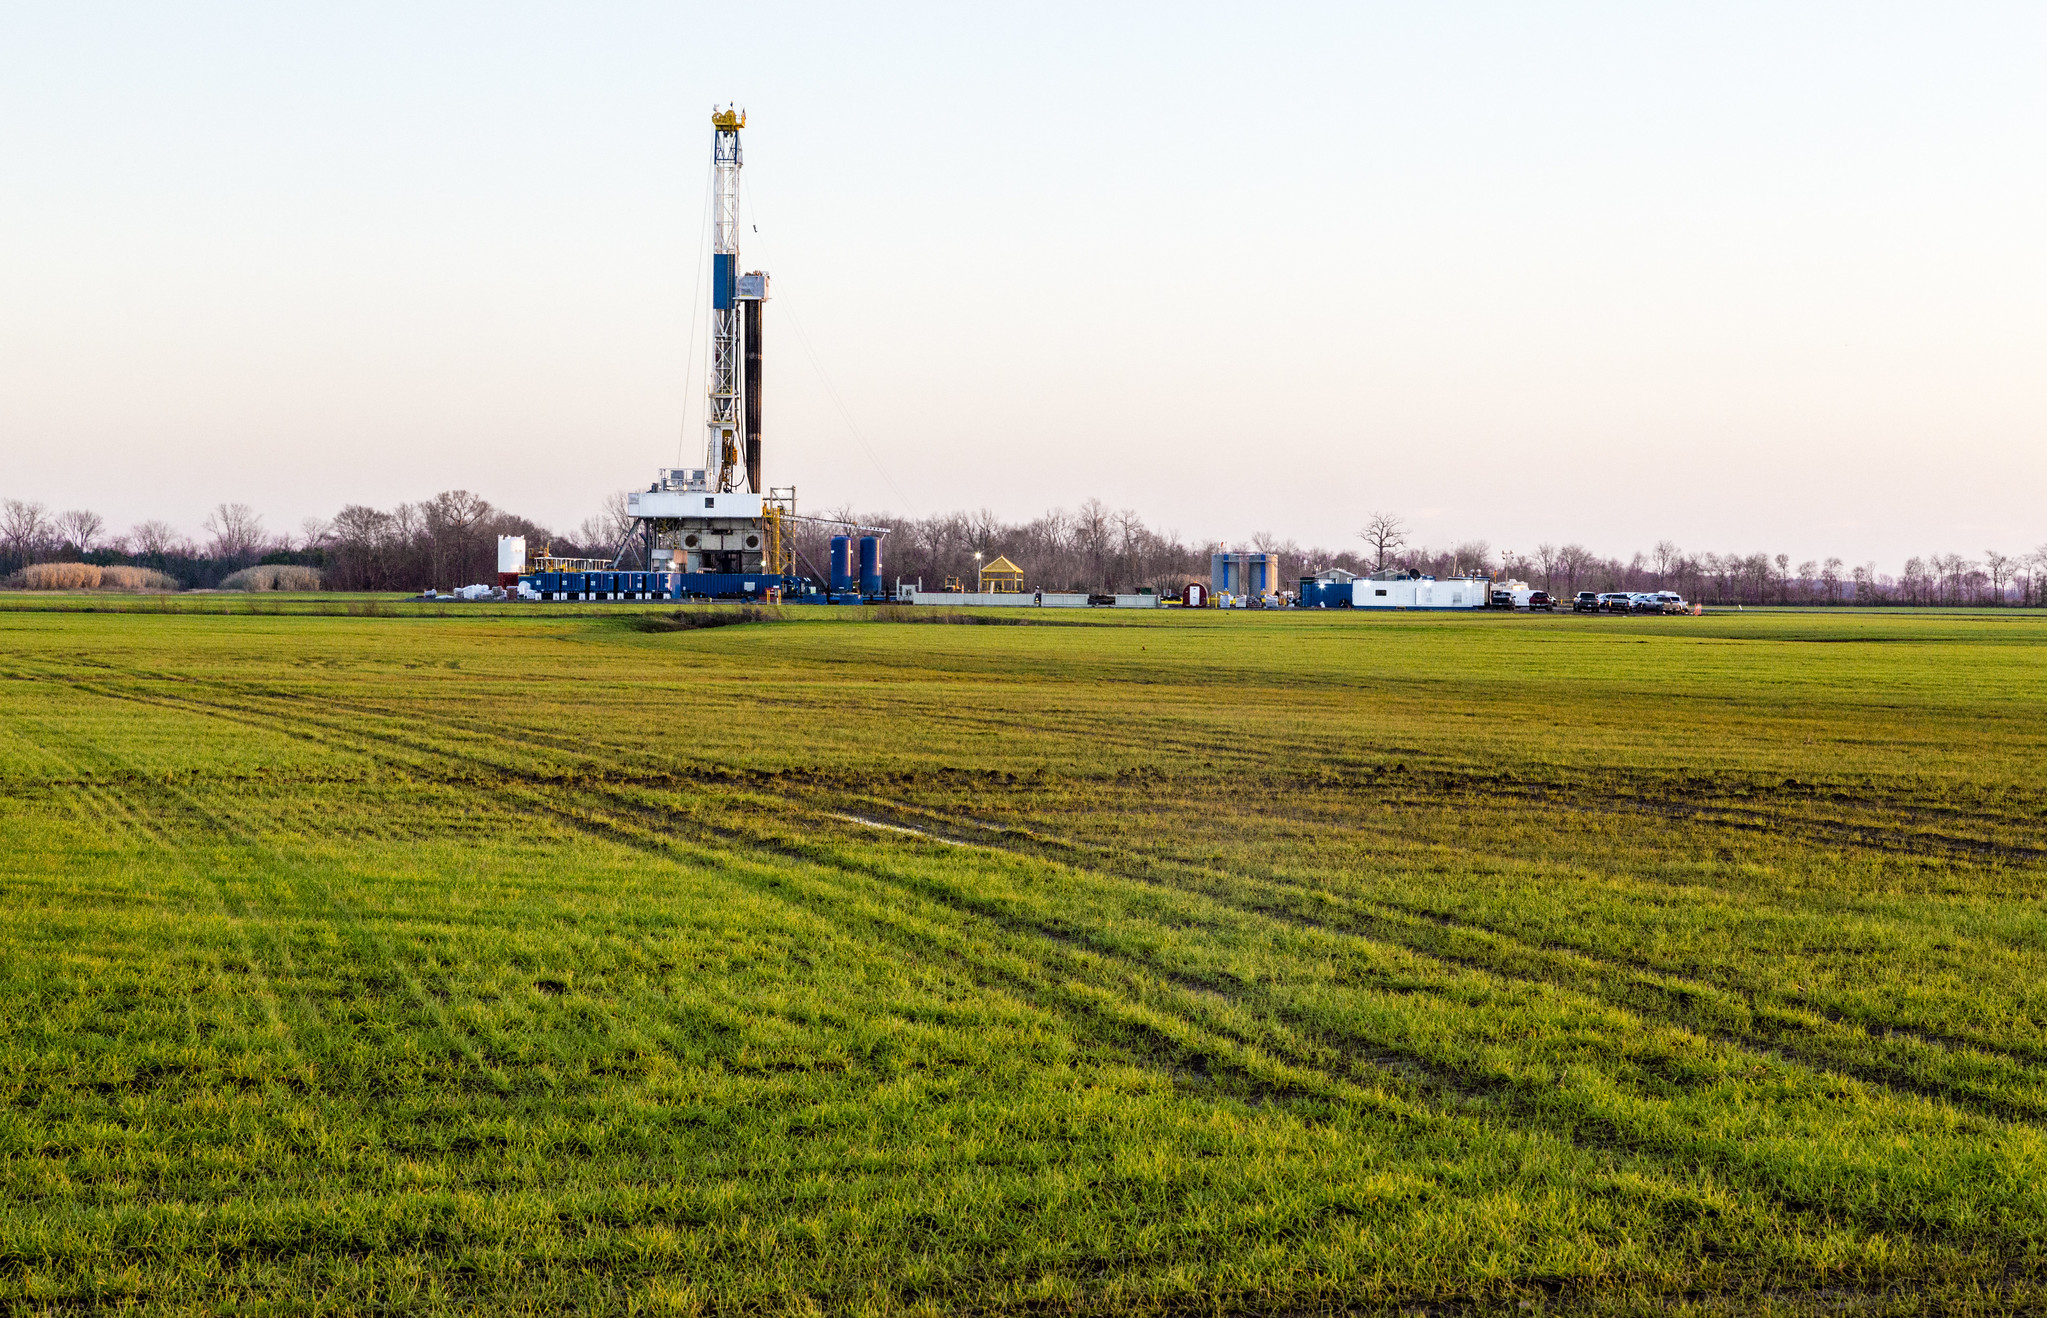 A natural gas well in Louisiana. Image: Daniel Foster/Flickr